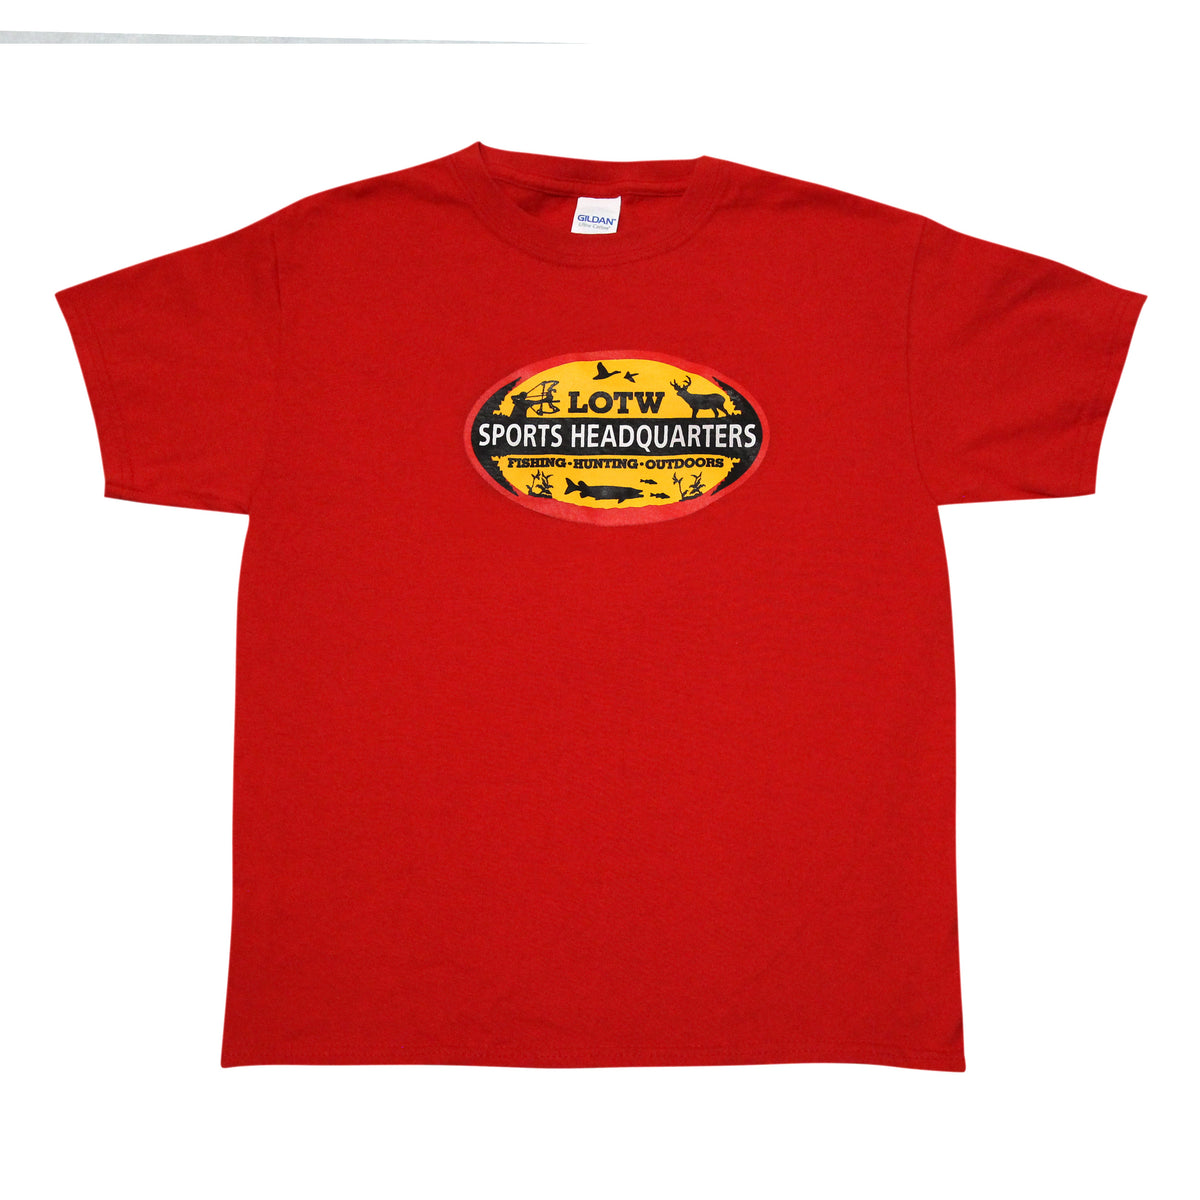 LOTW Sports Headquarters Youth T-Shirt - Red